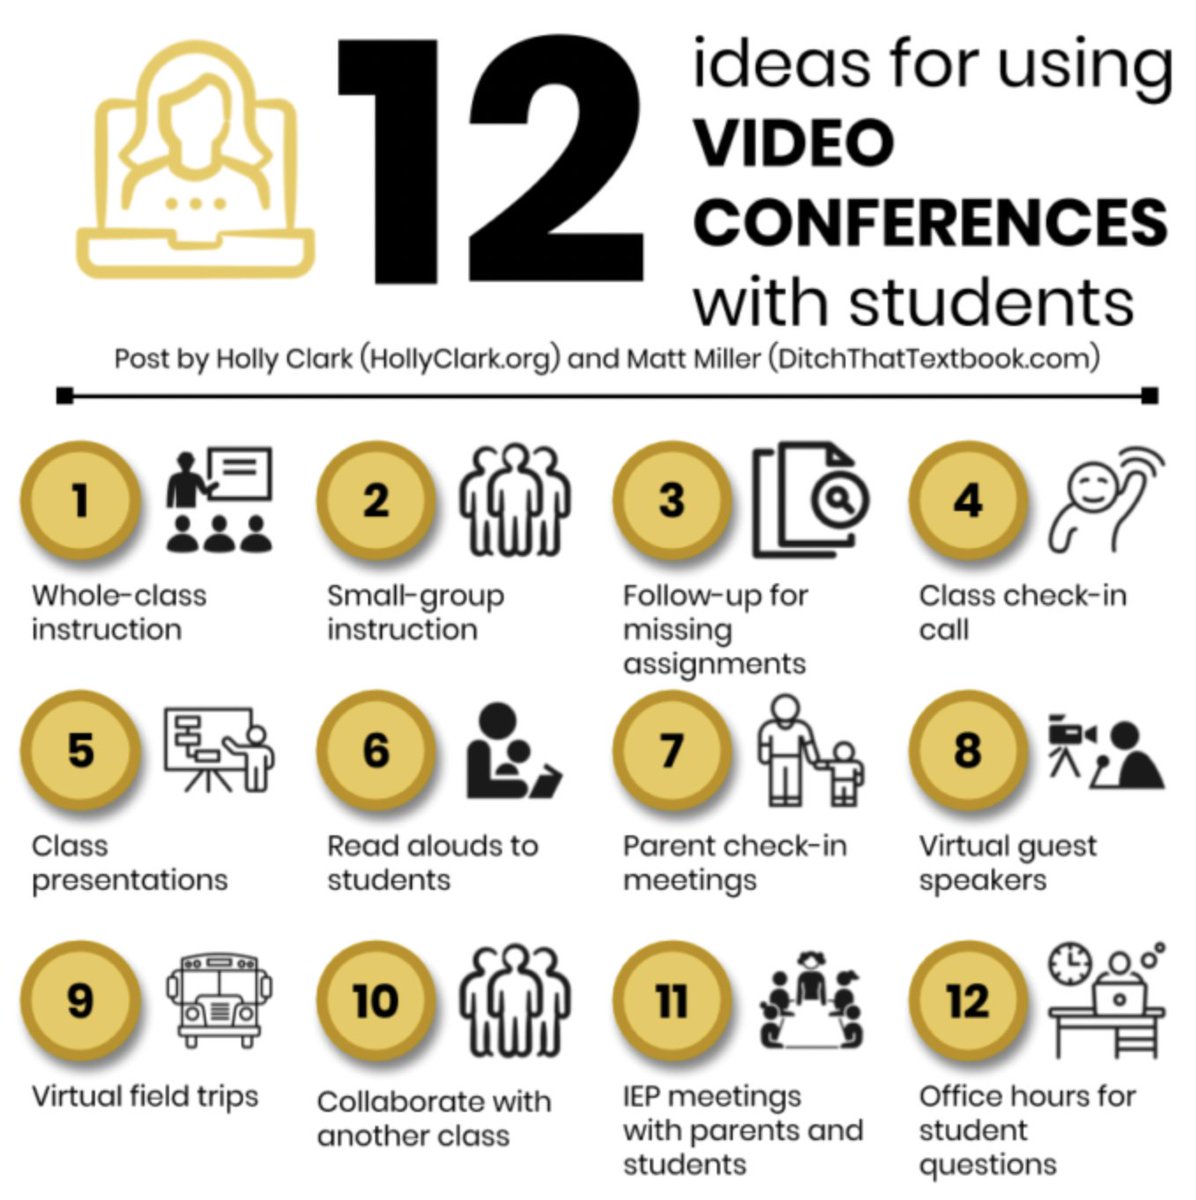 #Infographic: 12 Ideas for using video conferences with students! #HybridWorkplace #Technology #Innovation #Education #AVTech #EmergingTech #AudioVisual #VR #Metaverse #AI #Camera #Office cc: @CathyHackl @PaulMiller @benwood @antgrasso @Ronald_vanLoon @lindagrass0 @mvollmer1